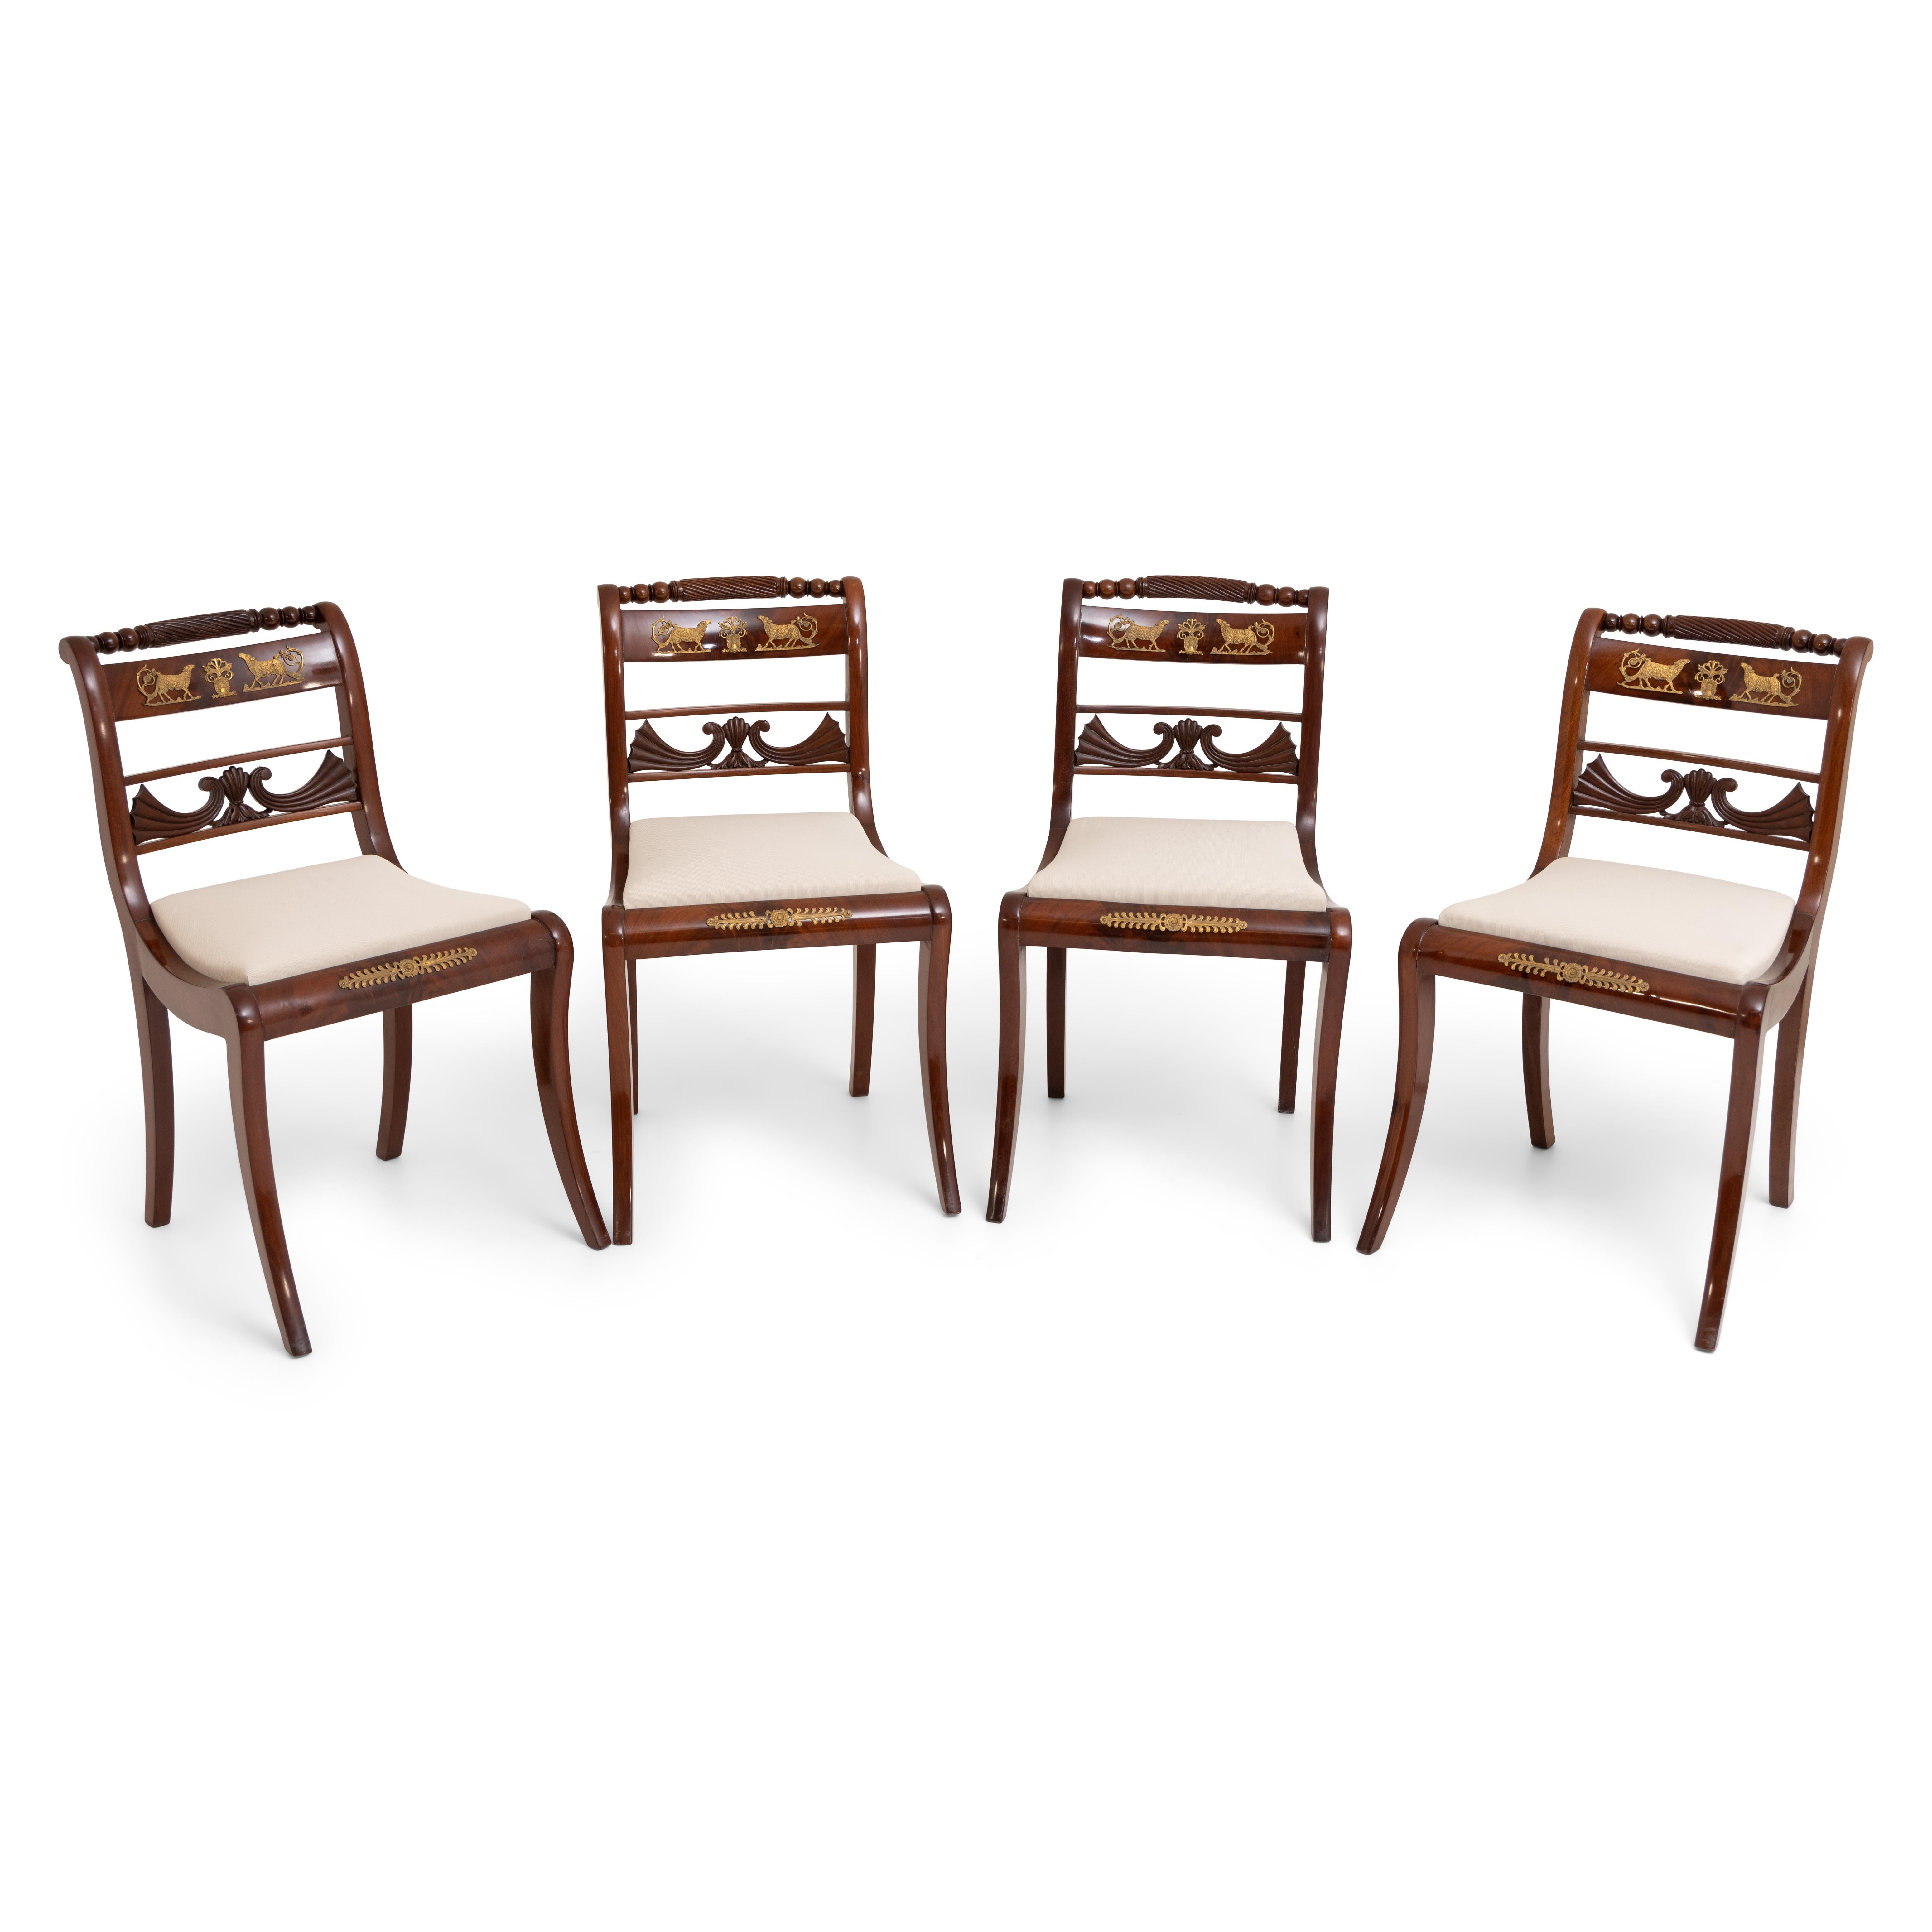 Set of six chairs, consisting of four chairs and two armchairs out of mahogany, circa 1830. The chairs stand on sabre legs and are decorated with bronze fittings in the shape of lambs and leaves. The backrests show a pierced carved center strut in